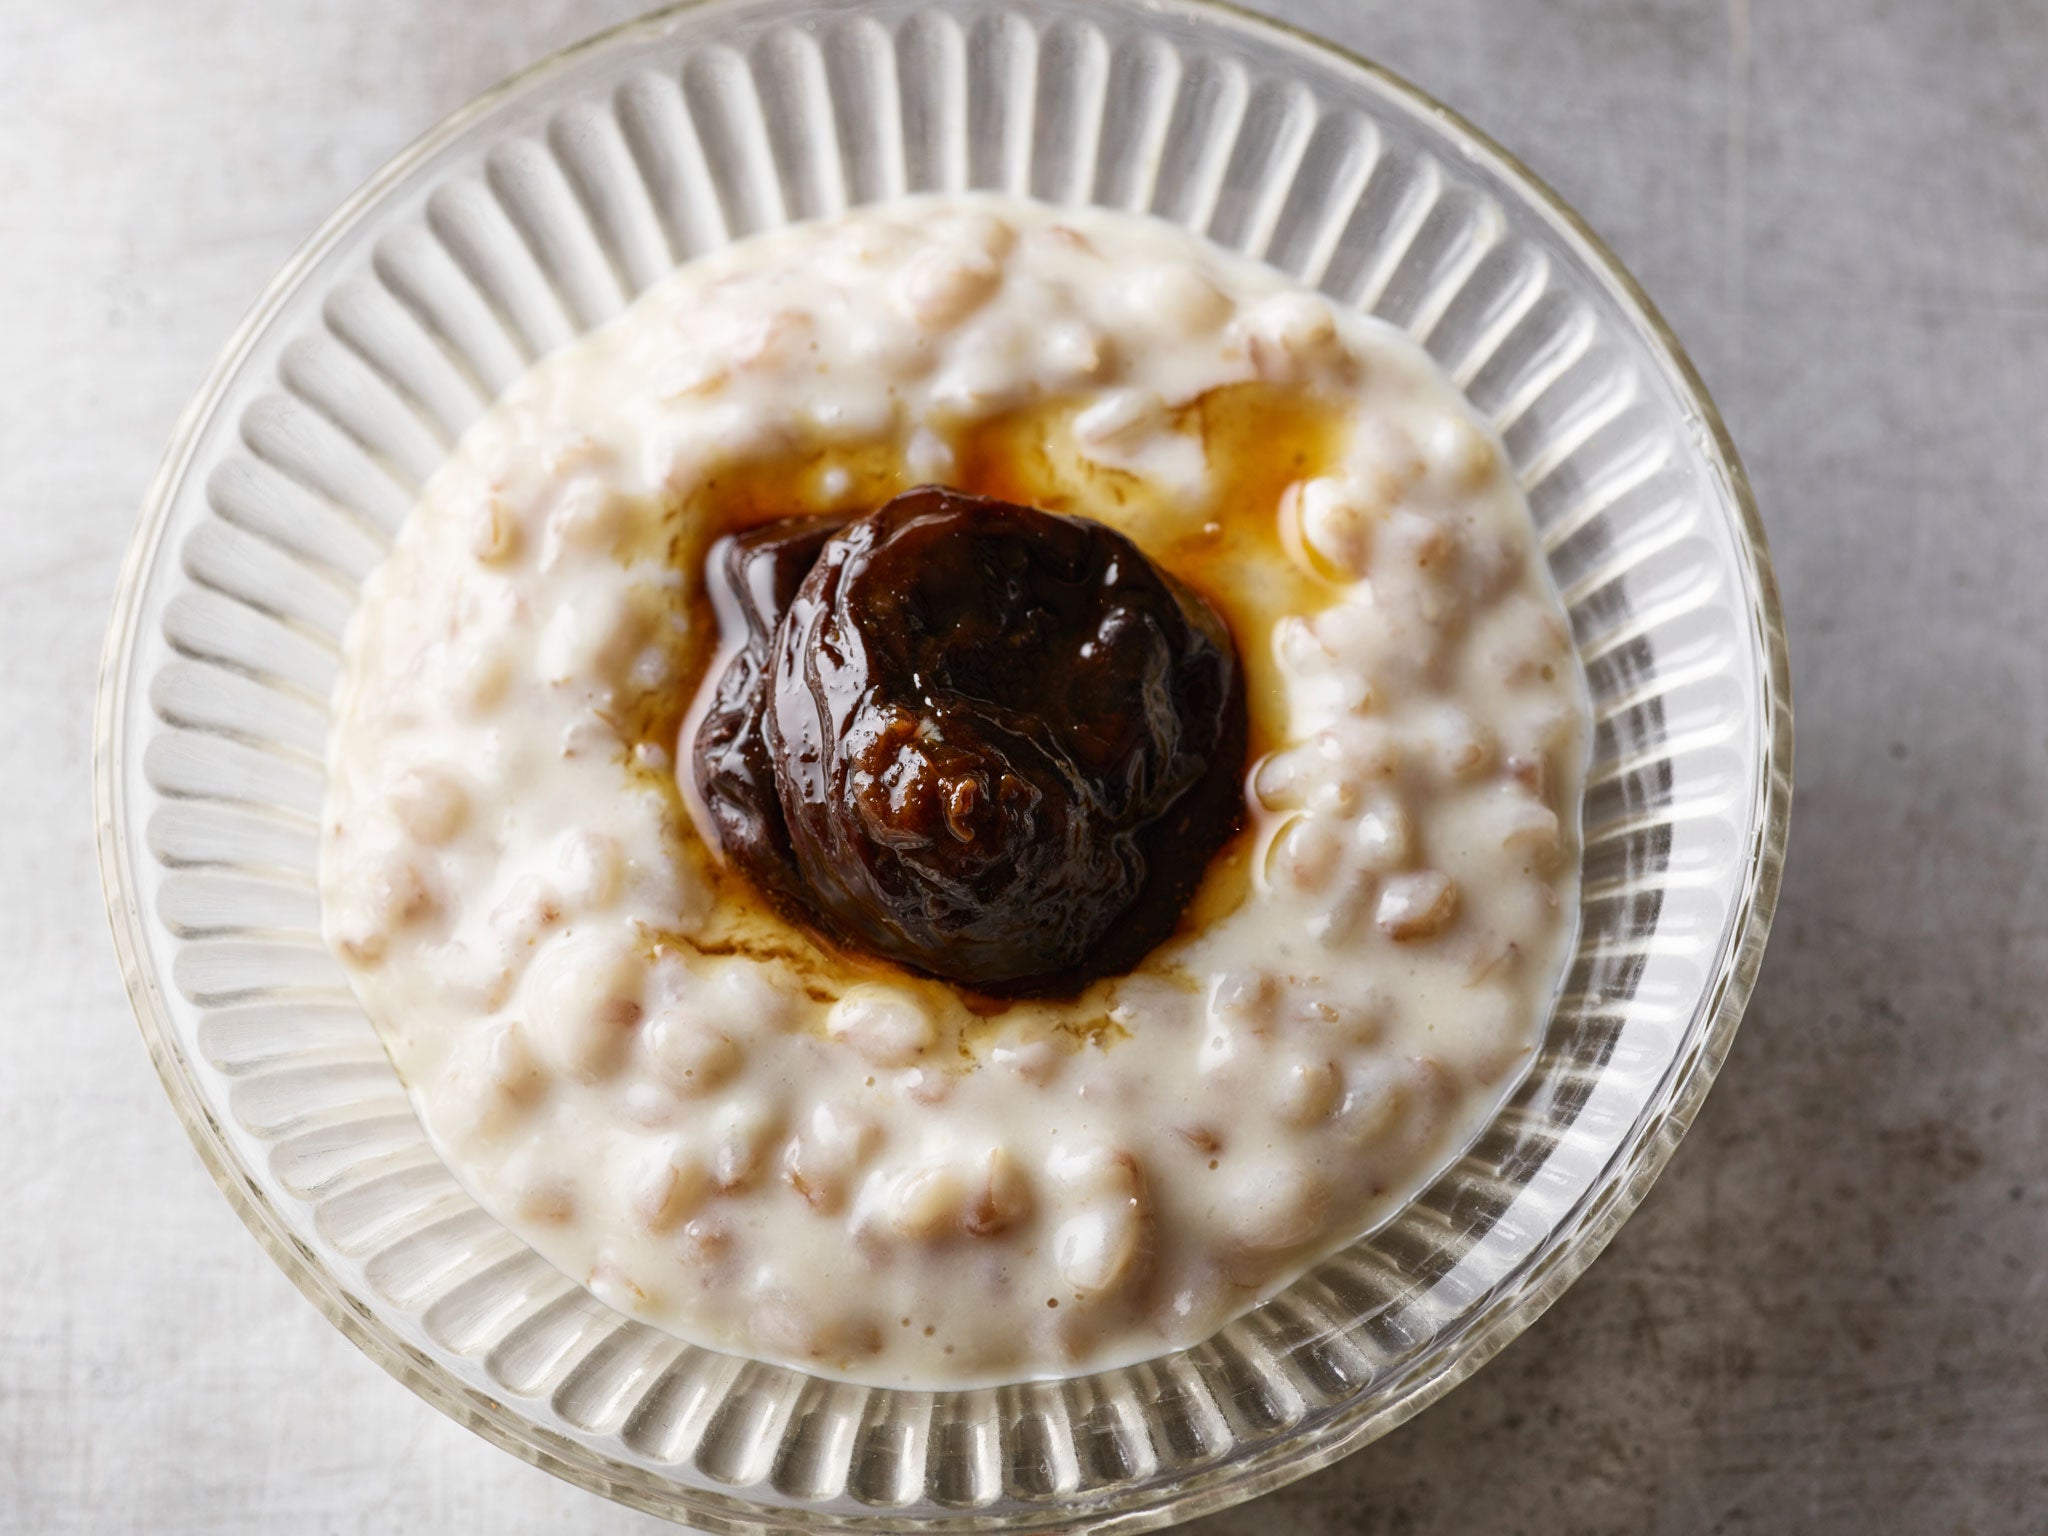 Creamy and healthy: Spelt pudding with prunes